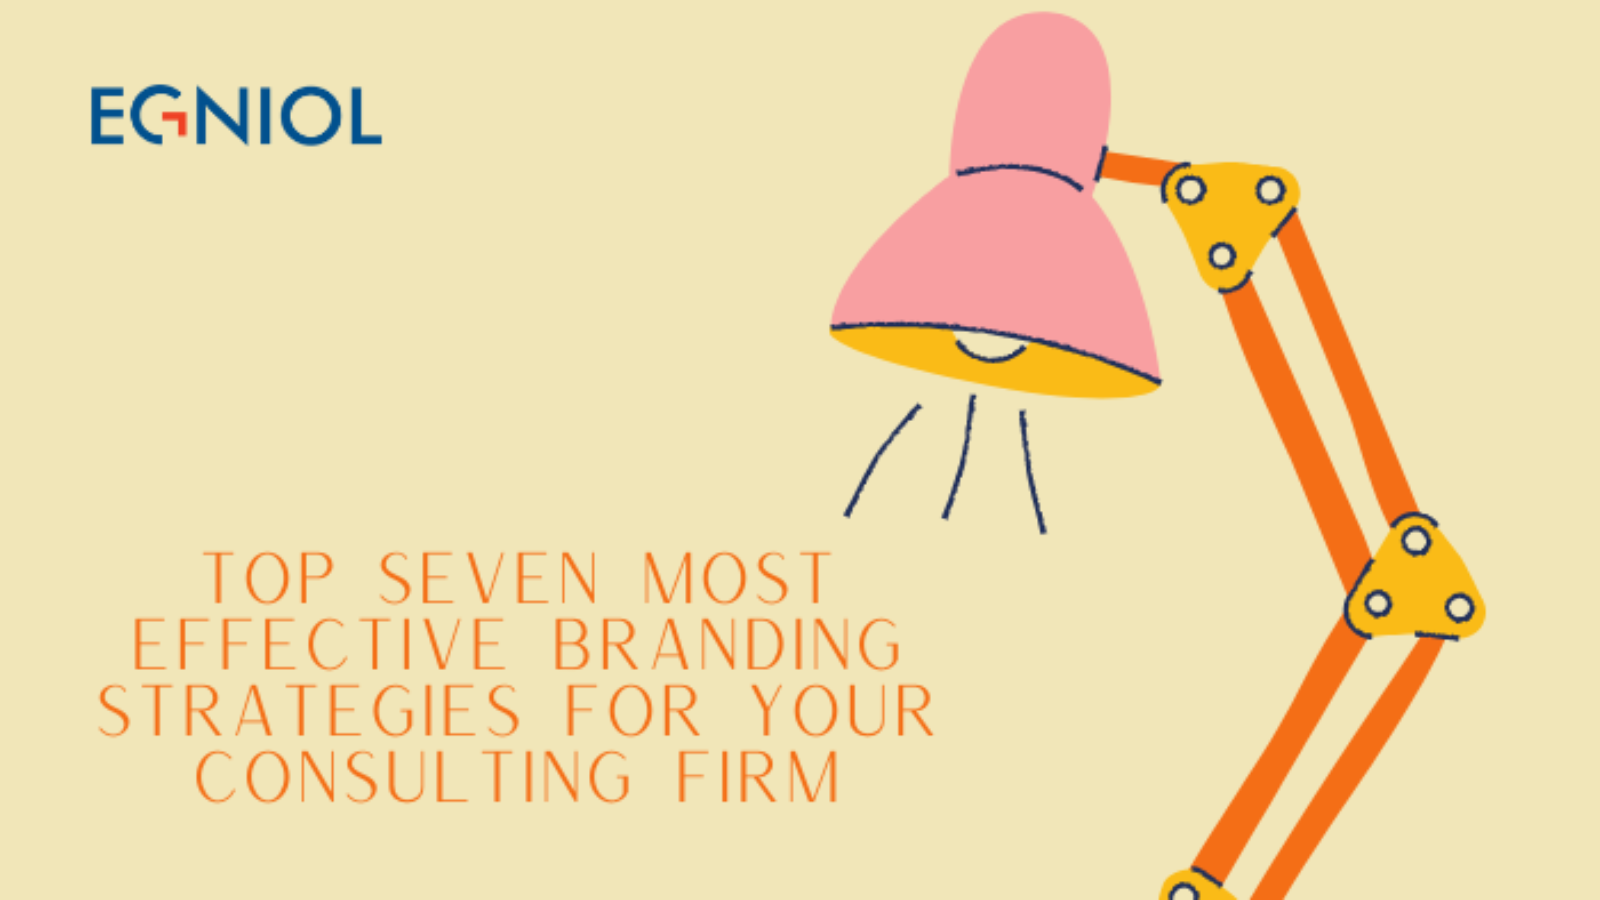 Top Seven Most Effective Branding Strategies For Your Consulting Firm - By Egniol